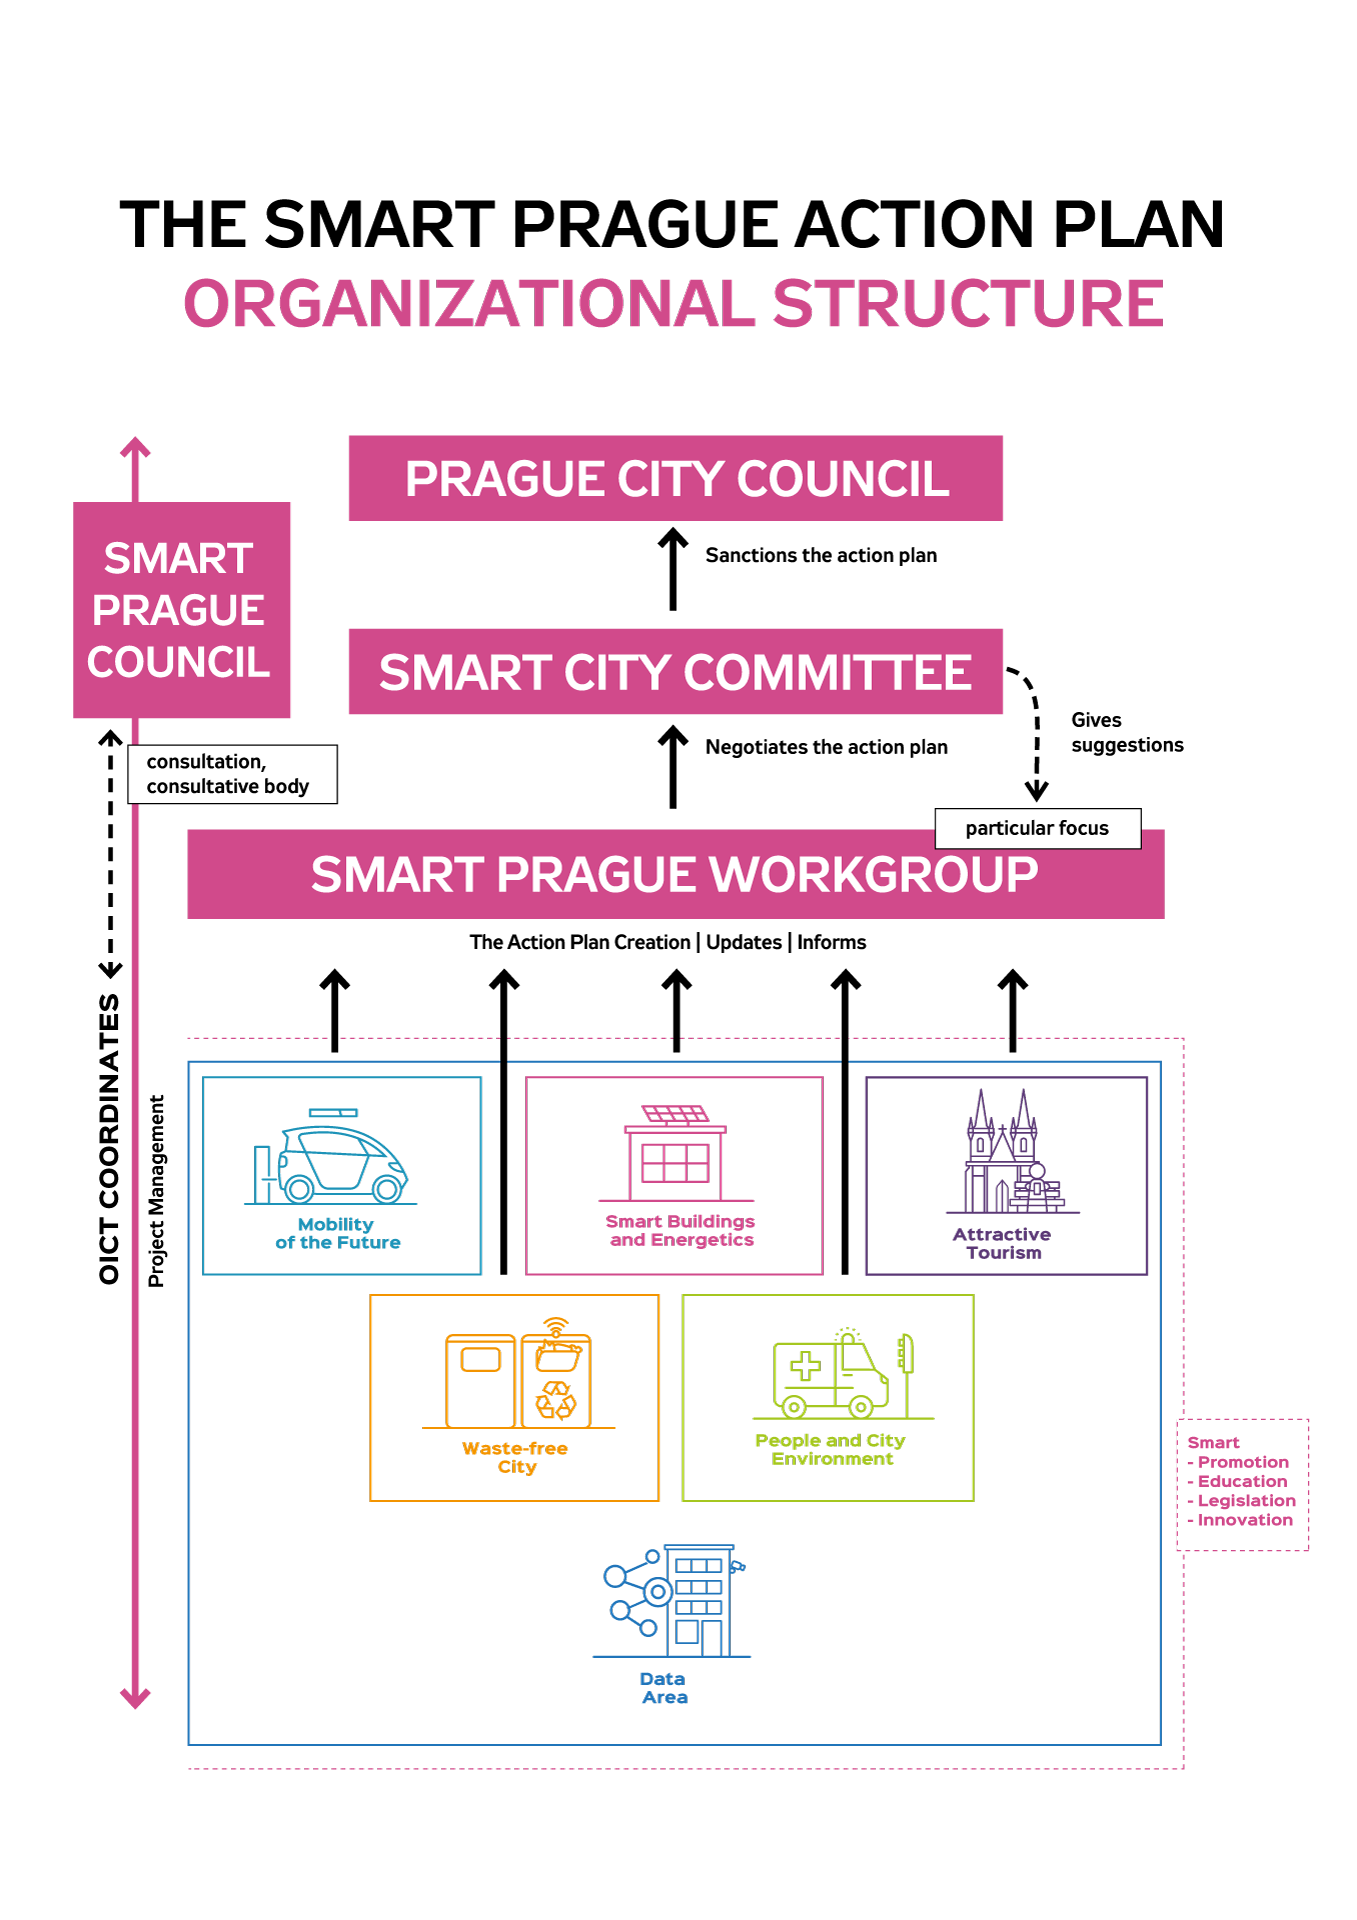 Managerial Structure and The Smart Prague 2030 Action Plan Process